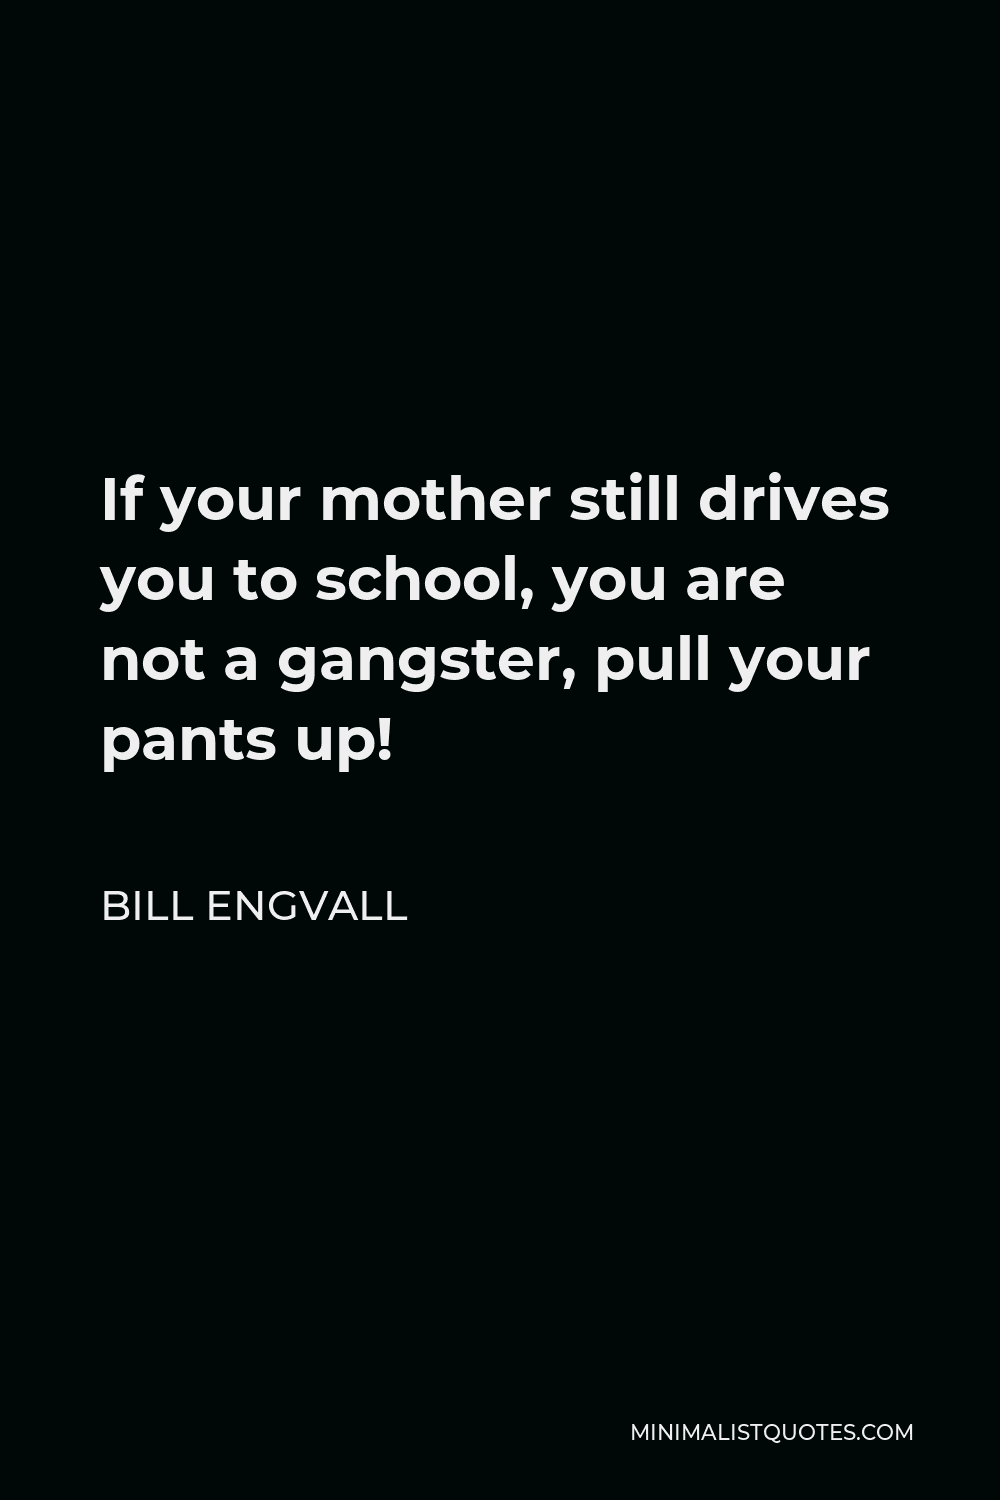 Bill Engvall Quote - If your mother still drives you to school, you are not a gangster, pull your pants up!